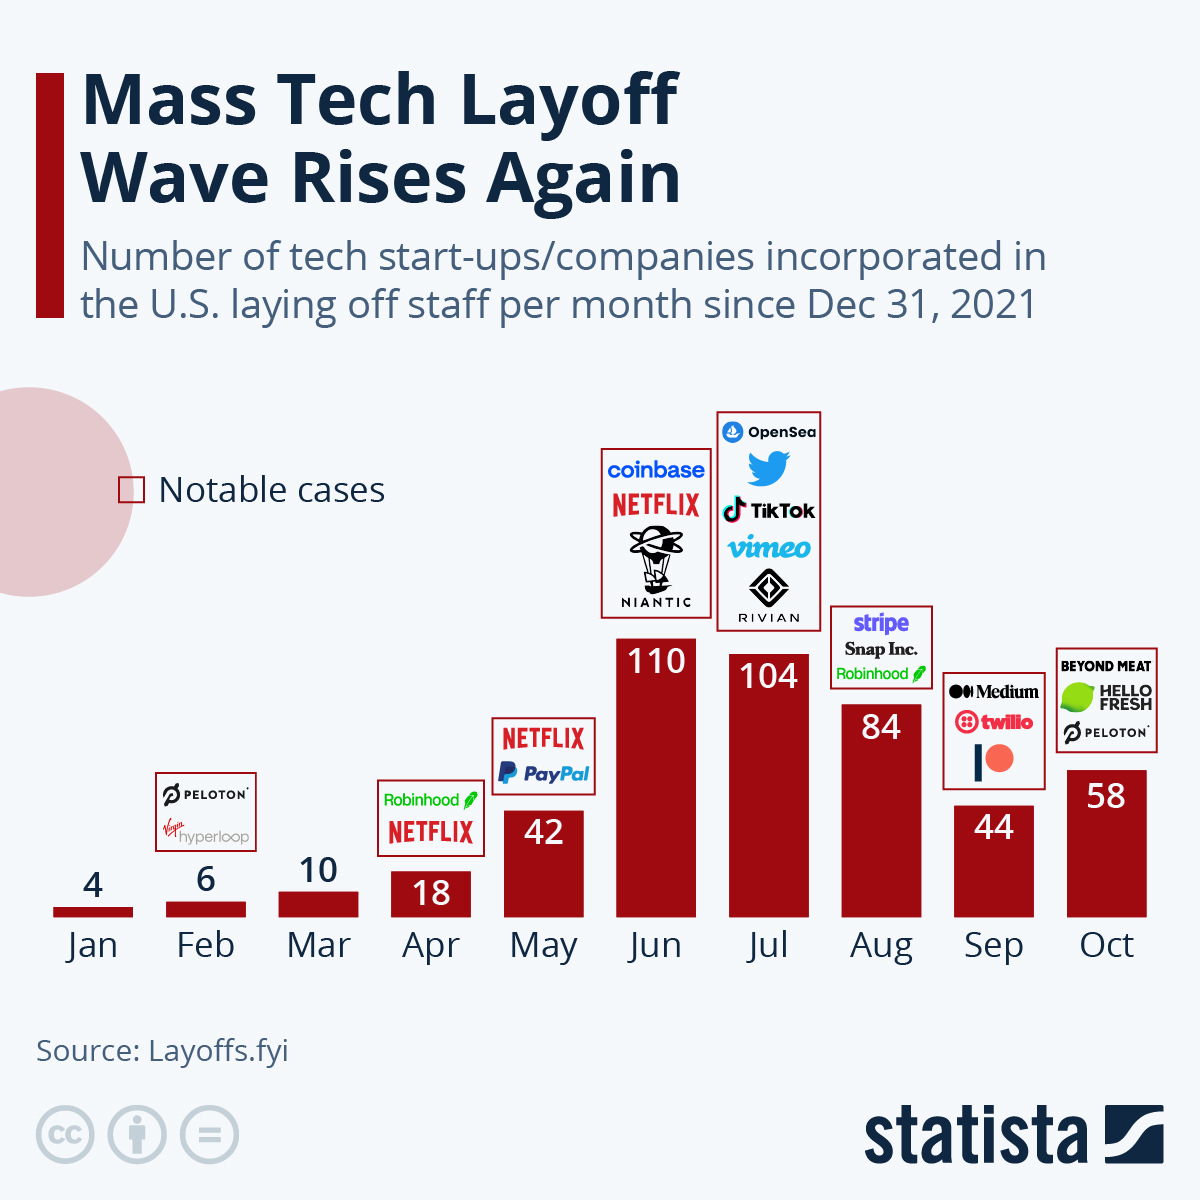 Mass Layoff Wave Rises Again in the Technology Sector